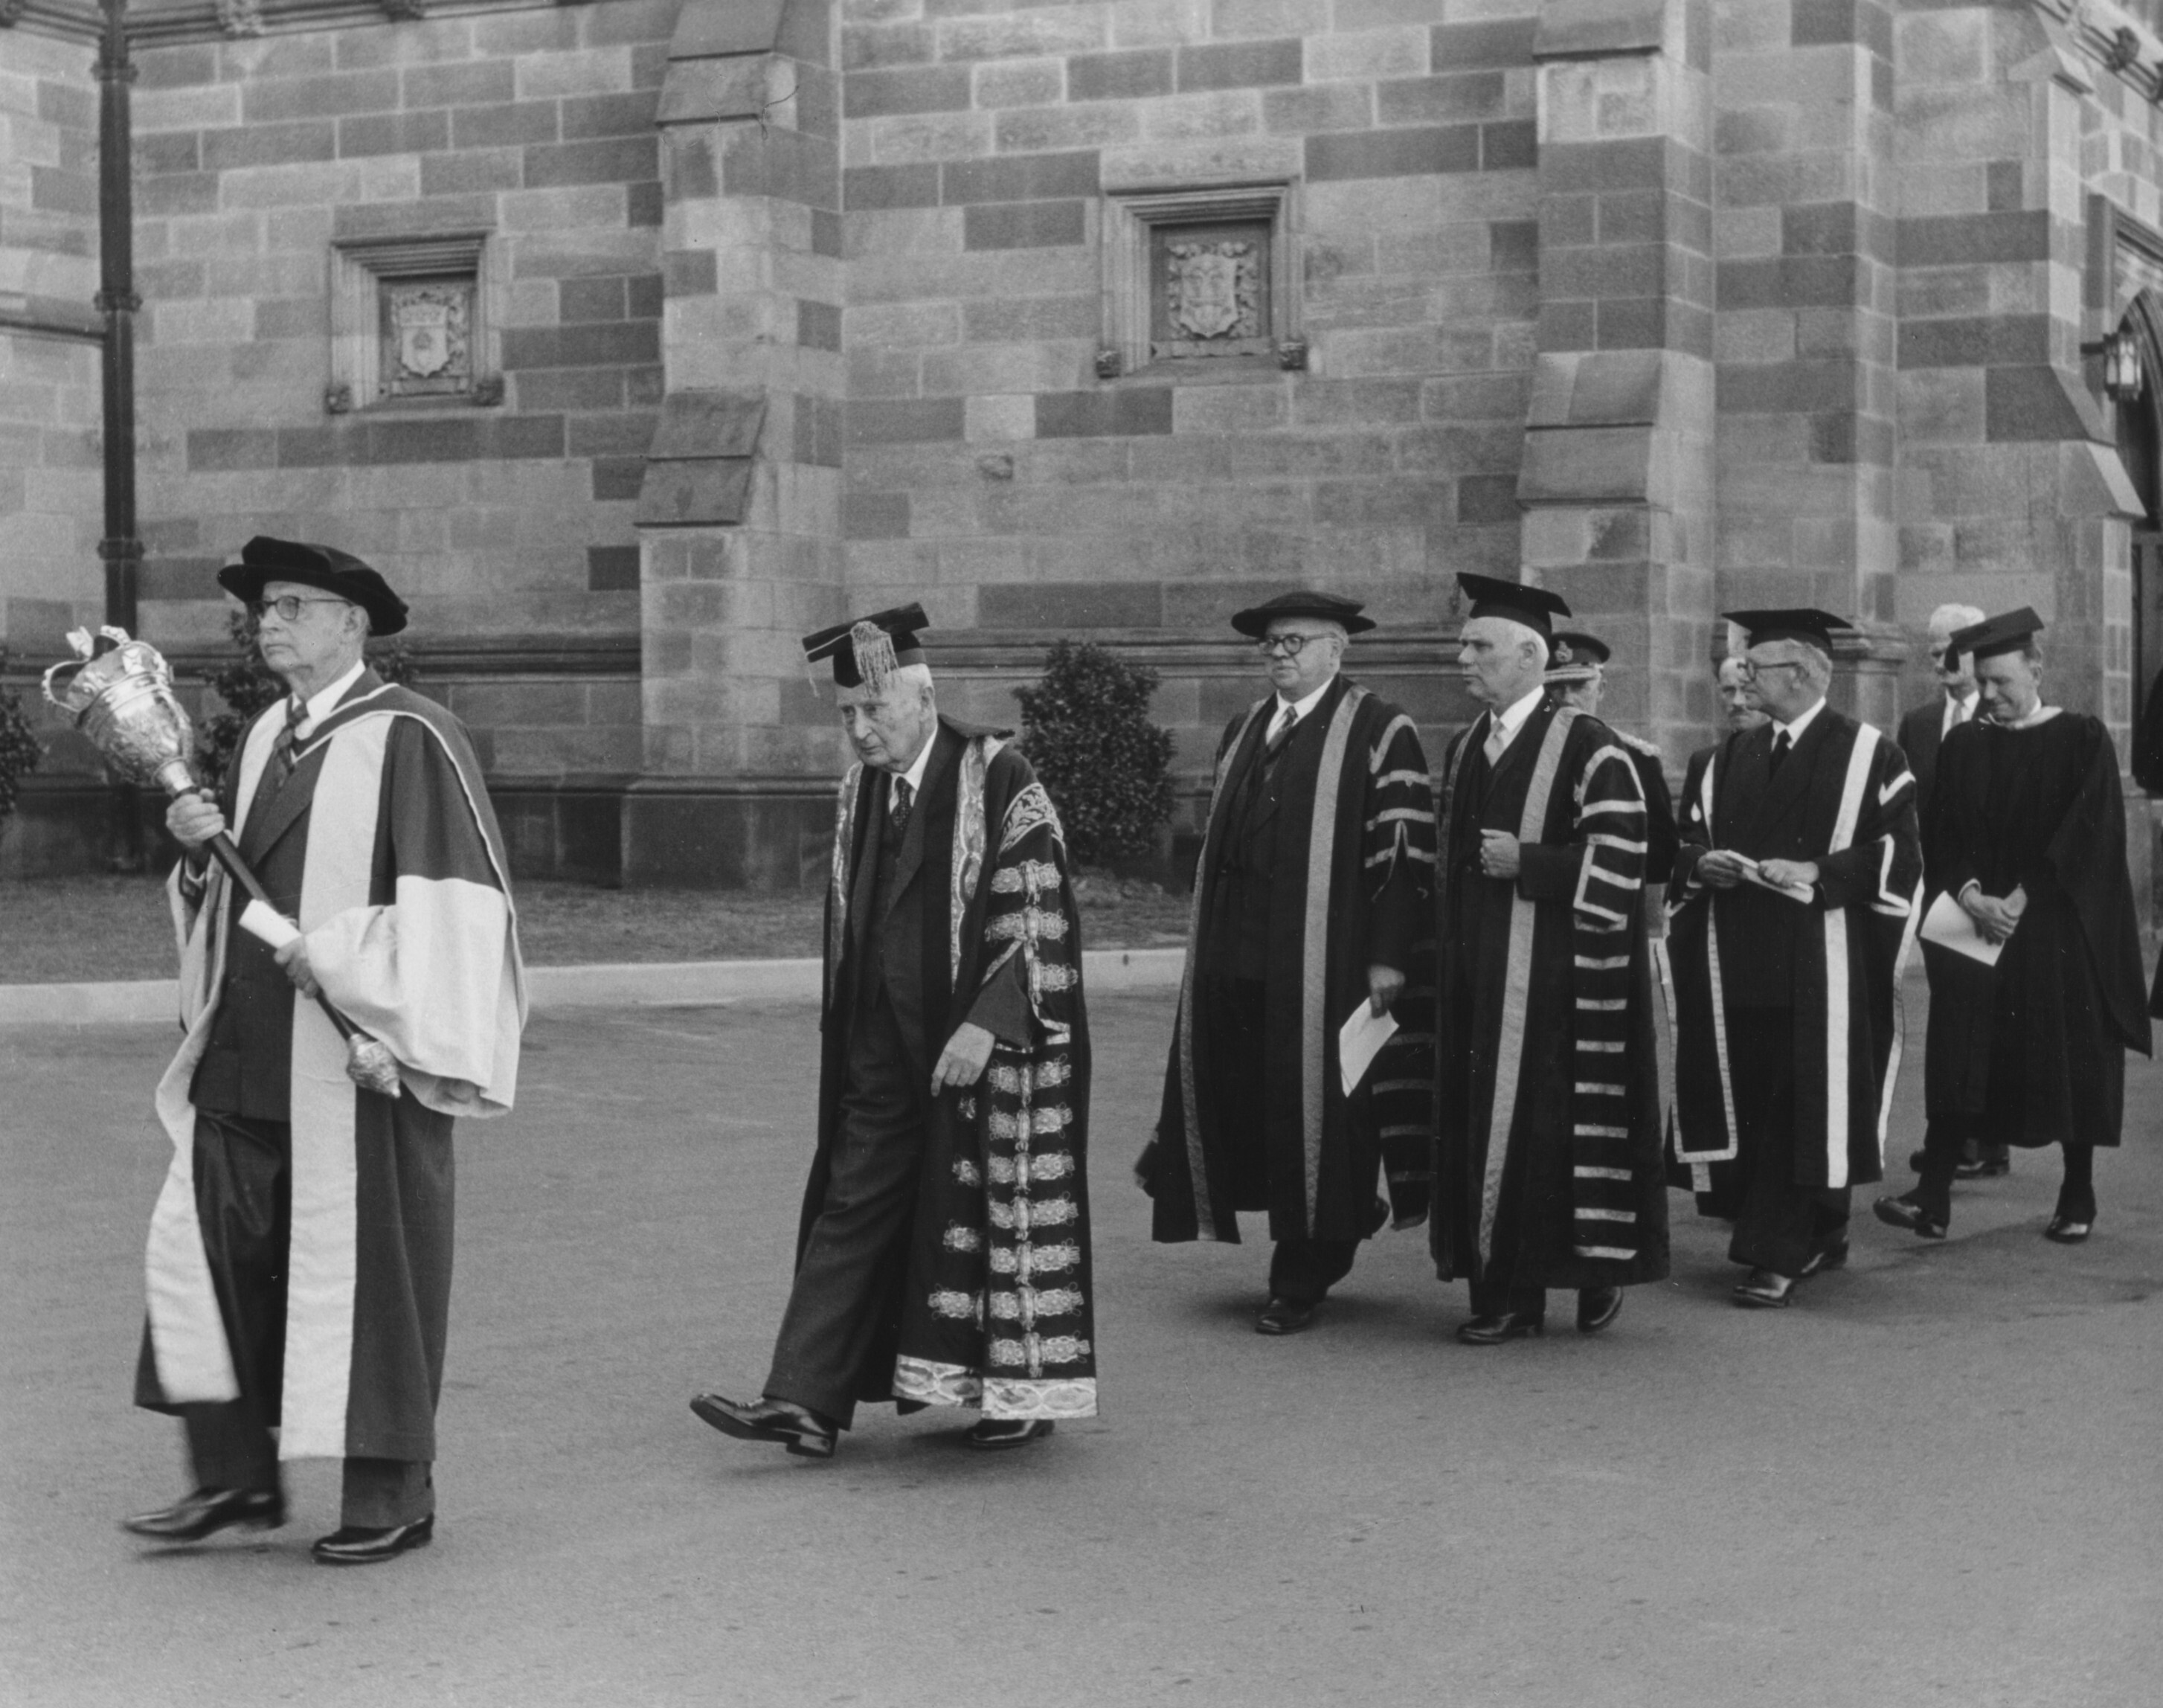 ACADEMIC PROCESSION IN FRONT OF MAIN BUILDING